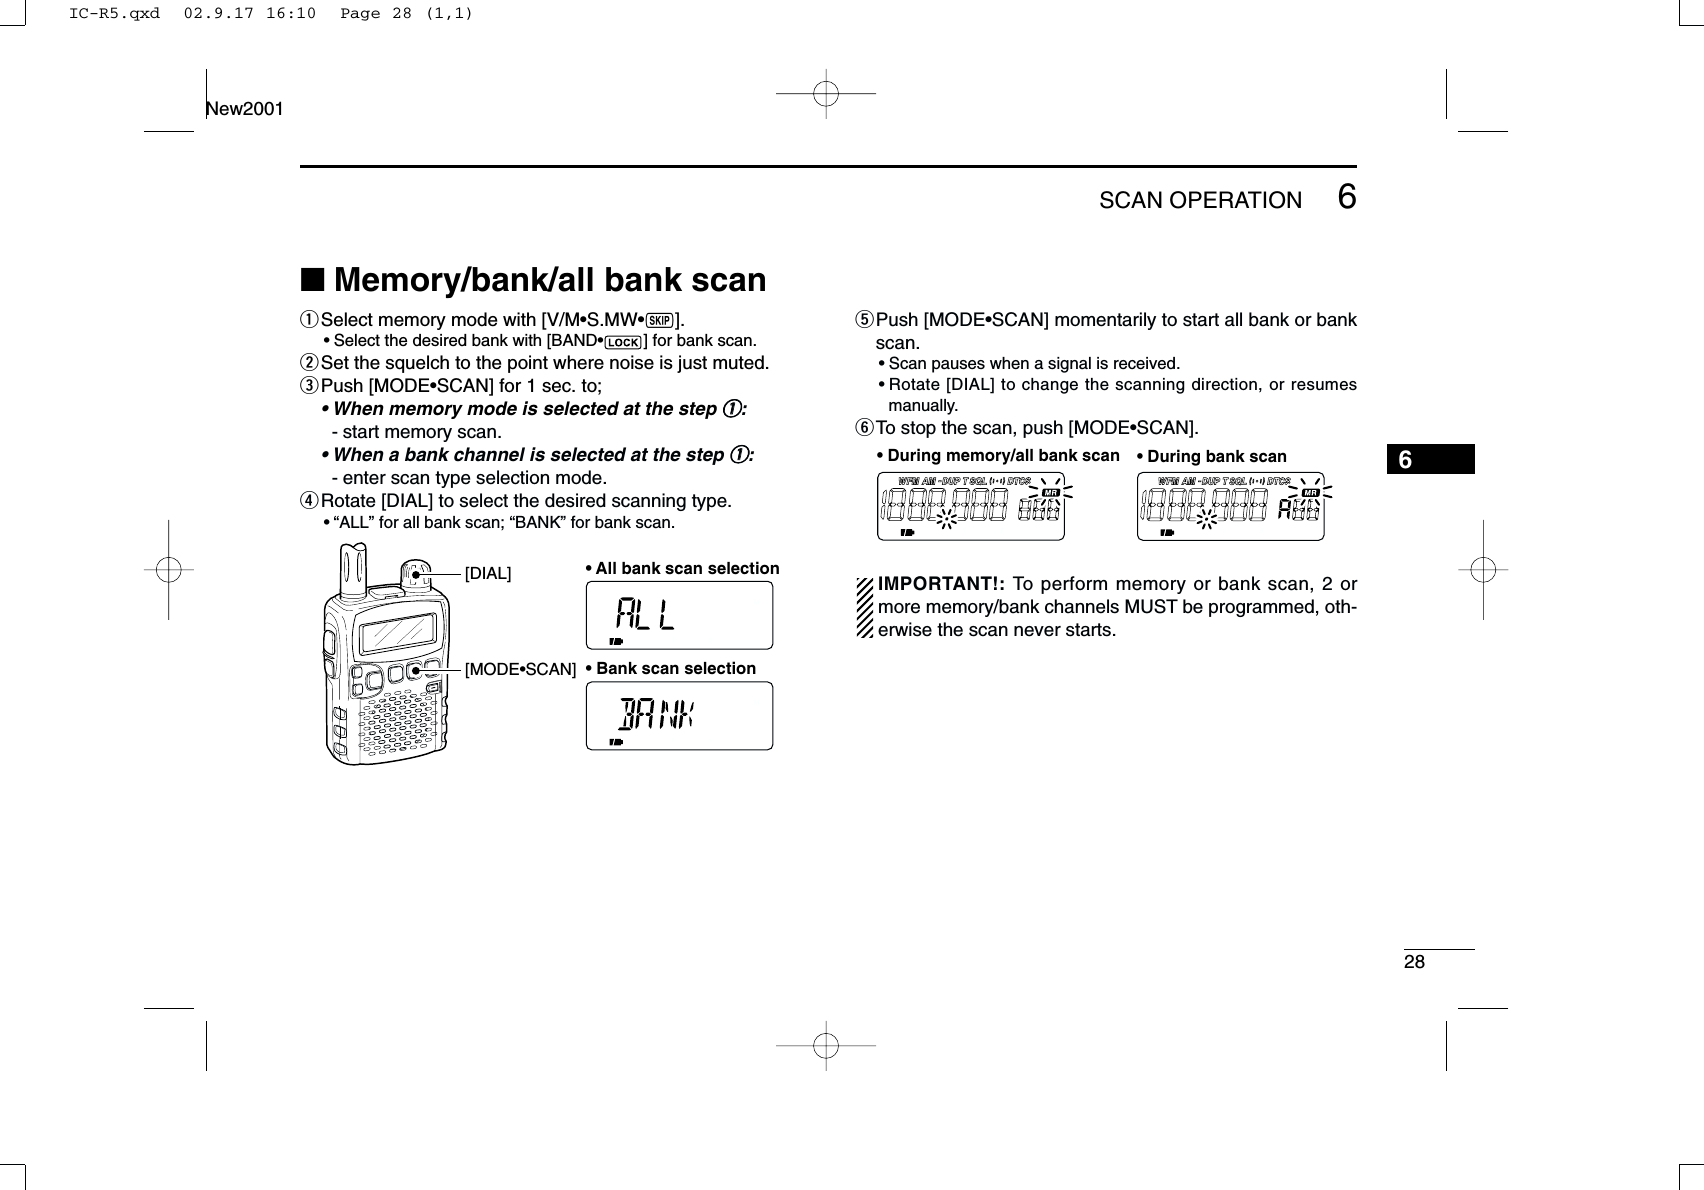 286SCAN OPERATIONNew20016■Memory/bank/all bank scan qSelect memory mode with [V/M•S.MW•~].•Select the desired bank with [BAND•] for bank scan.wSet the squelch to the point where noise is just muted.ePush [MODE•SCAN] for 1 sec. to;• When memory mode is selected at the step qq:- start memory scan.• When a bank channel is selected at the step qq:- enter scan type selection mode.rRotate [DIAL] to select the desired scanning type.•“ALL” for all bank scan; “BANK” for bank scan.tPush [MODE•SCAN] momentarily to start all bank or bankscan.•Scan pauses when a signal is received.•Rotate [DIAL] to change the scanning direction, or resumesmanually.yTo stop the scan, push [MODE•SCAN].IMPORTANT!: To perform memory or bank scan, 2 ormore memory/bank channels MUST be programmed, oth-erwise the scan never starts.FM AM DUP SQL DTCSTWFM AM DUP SQL DTCSTW• During memory/all bank scan • During bank scan[MODE•SCAN][DIAL] • All bank scan selection• Bank scan selectionIC-R5.qxd  02.9.17 16:10  Page 28 (1,1)